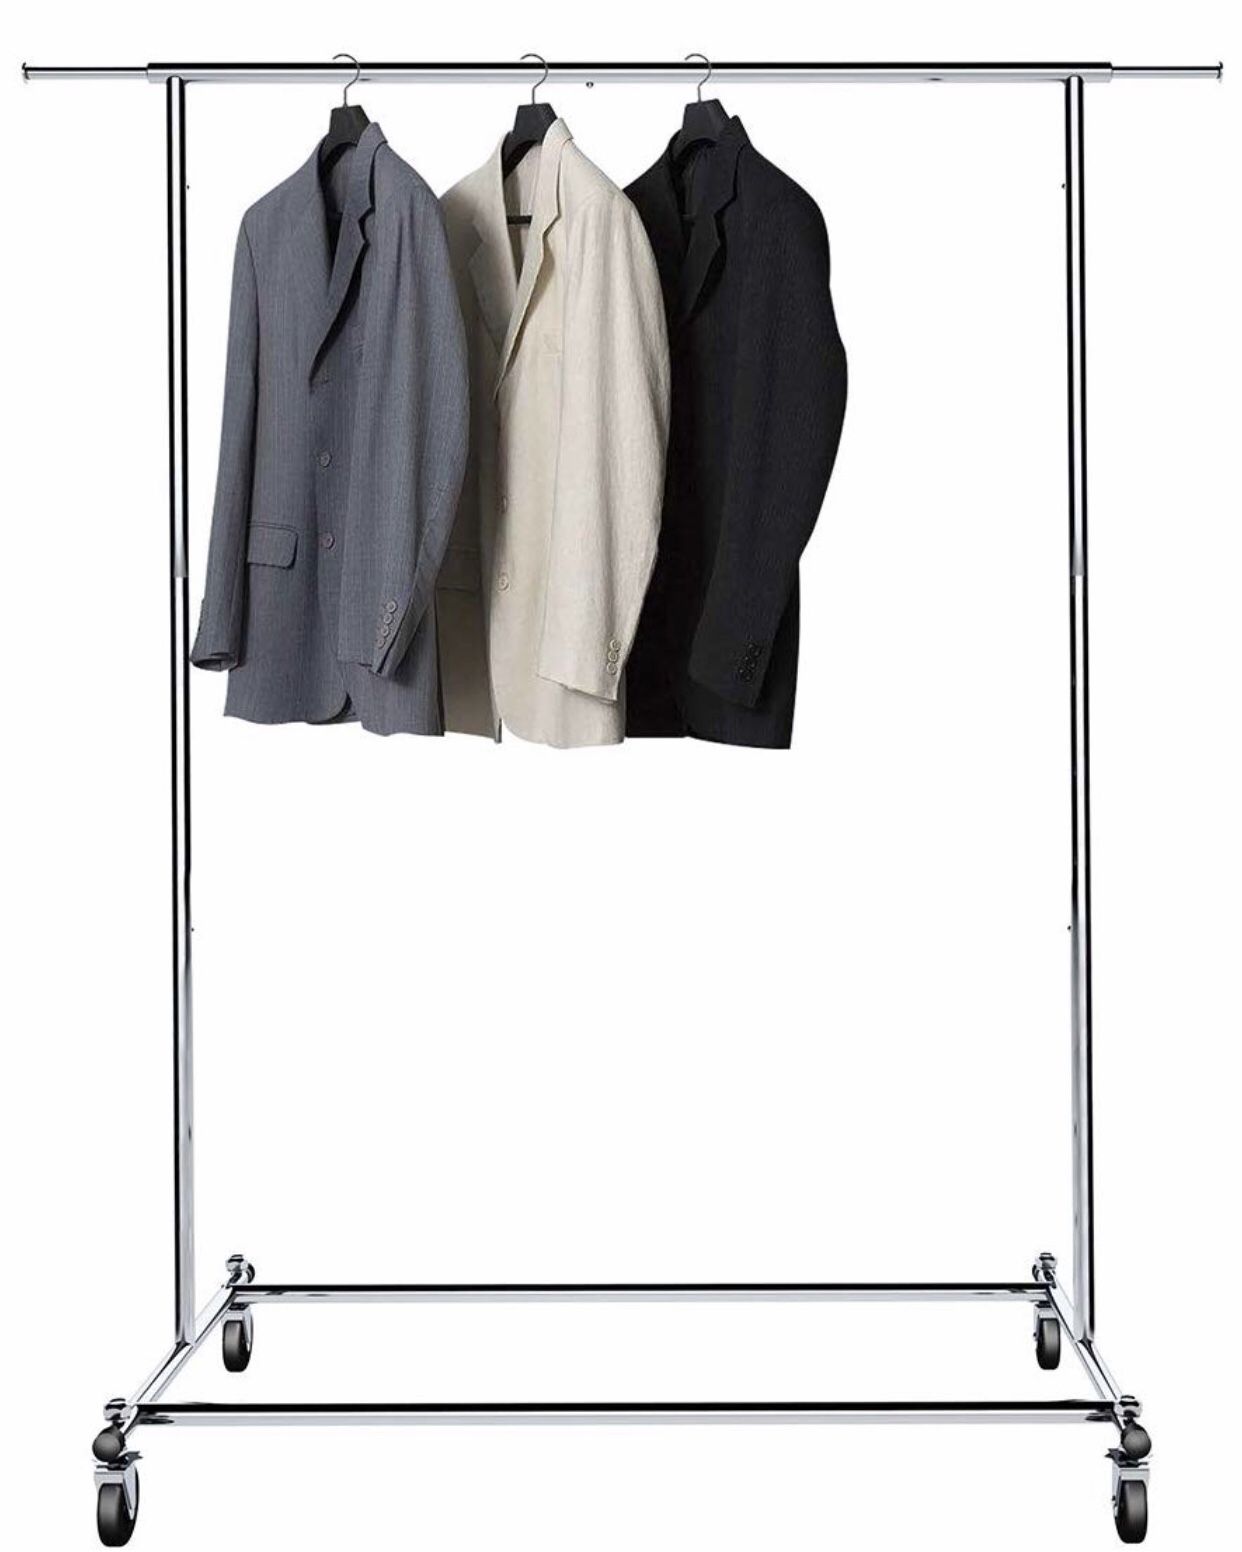 BigRoof Clothing Rack, 6.3FT Heavy Duty Clothes Rack Free Standing Garment Rack On Wheels Commercial Portable Closet Jacket Coat Rack Rolling Drying